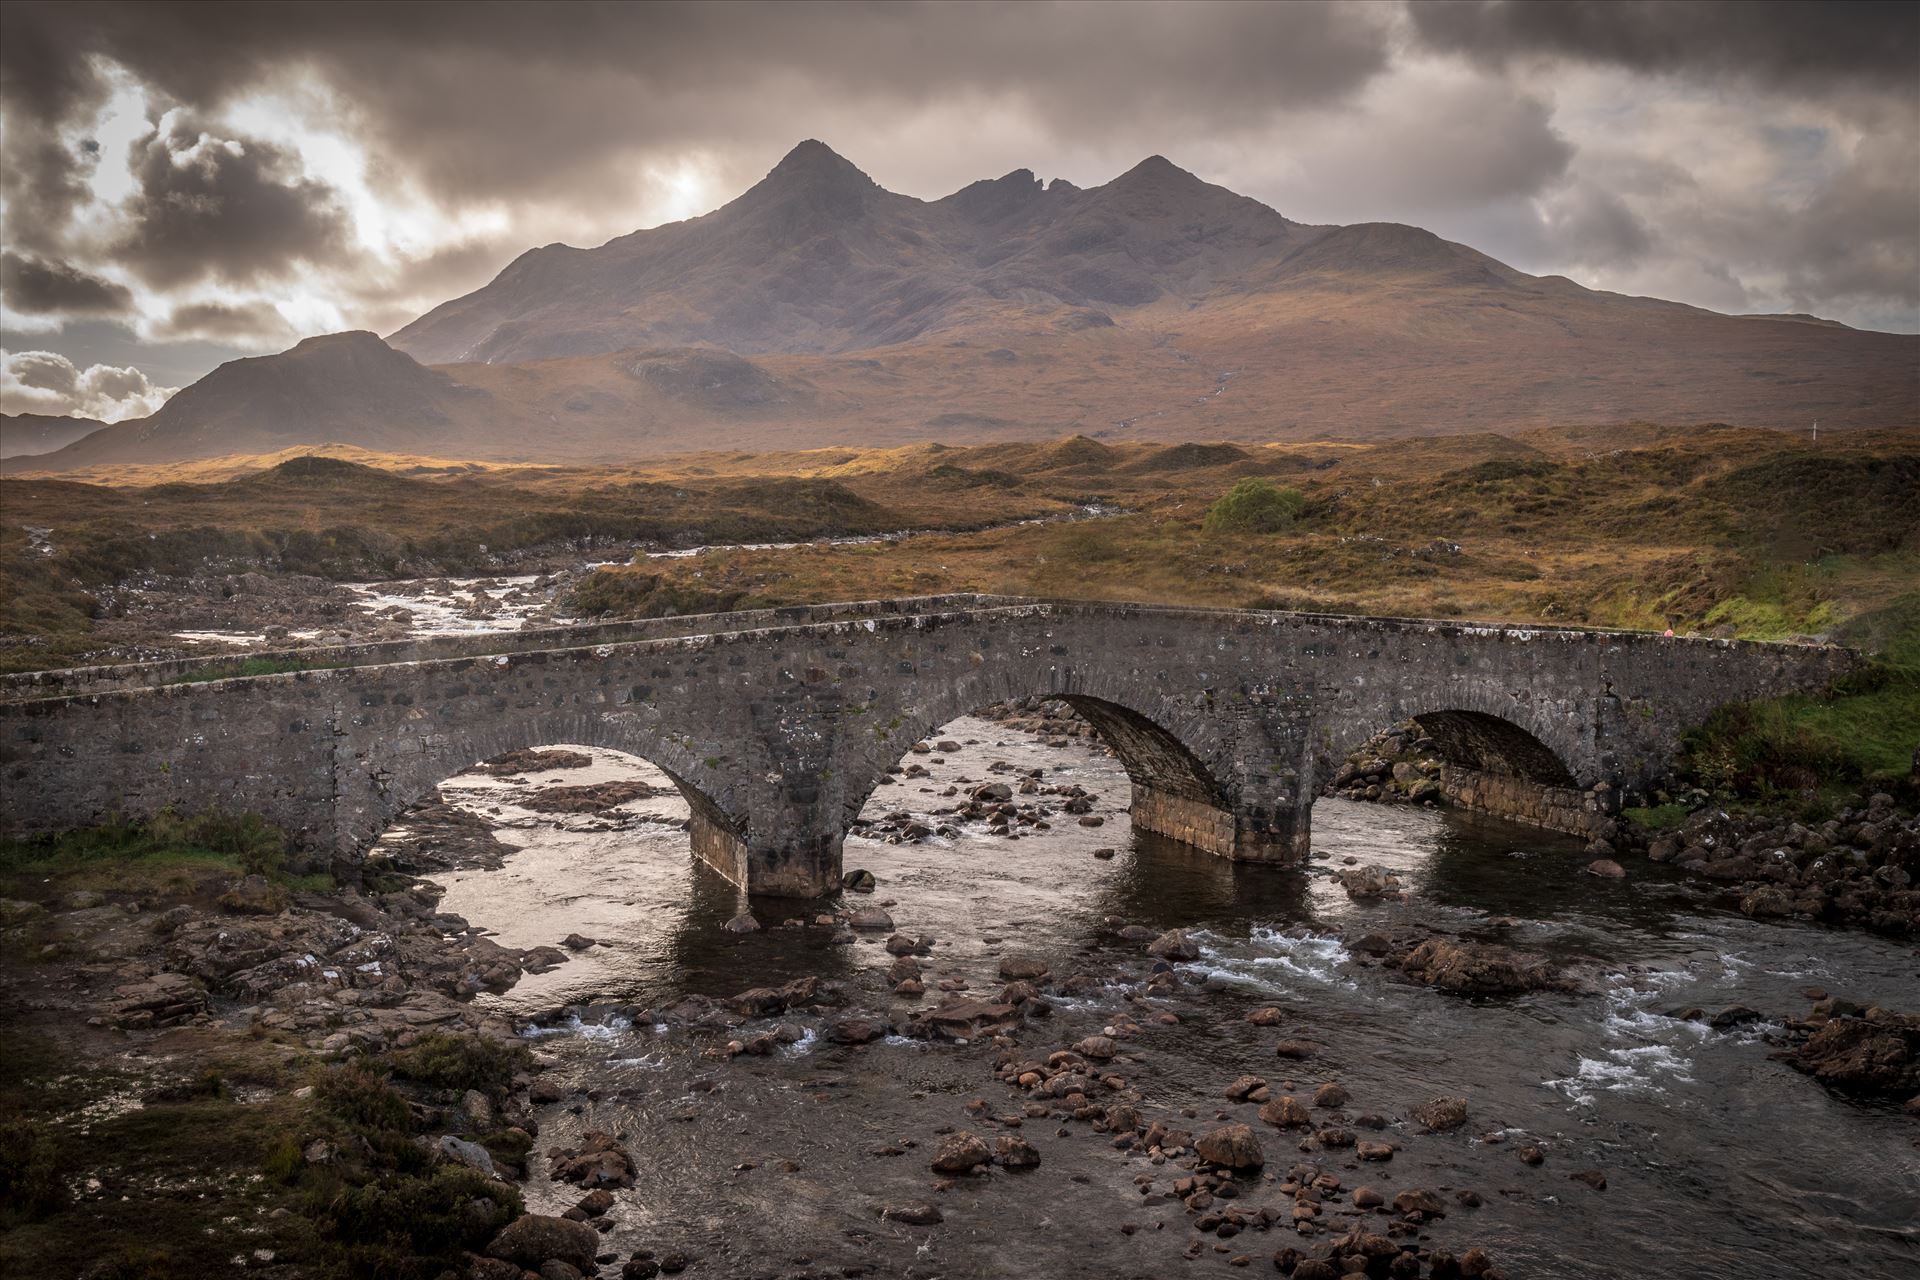 Sligachan Bridge, Isle of Skye (2) Sligachan is situated at the junction of the roads from Portree, Dunvegan & Broadford on the Isle of Skye. The Cullin mountains can be seen in the background. by philreay